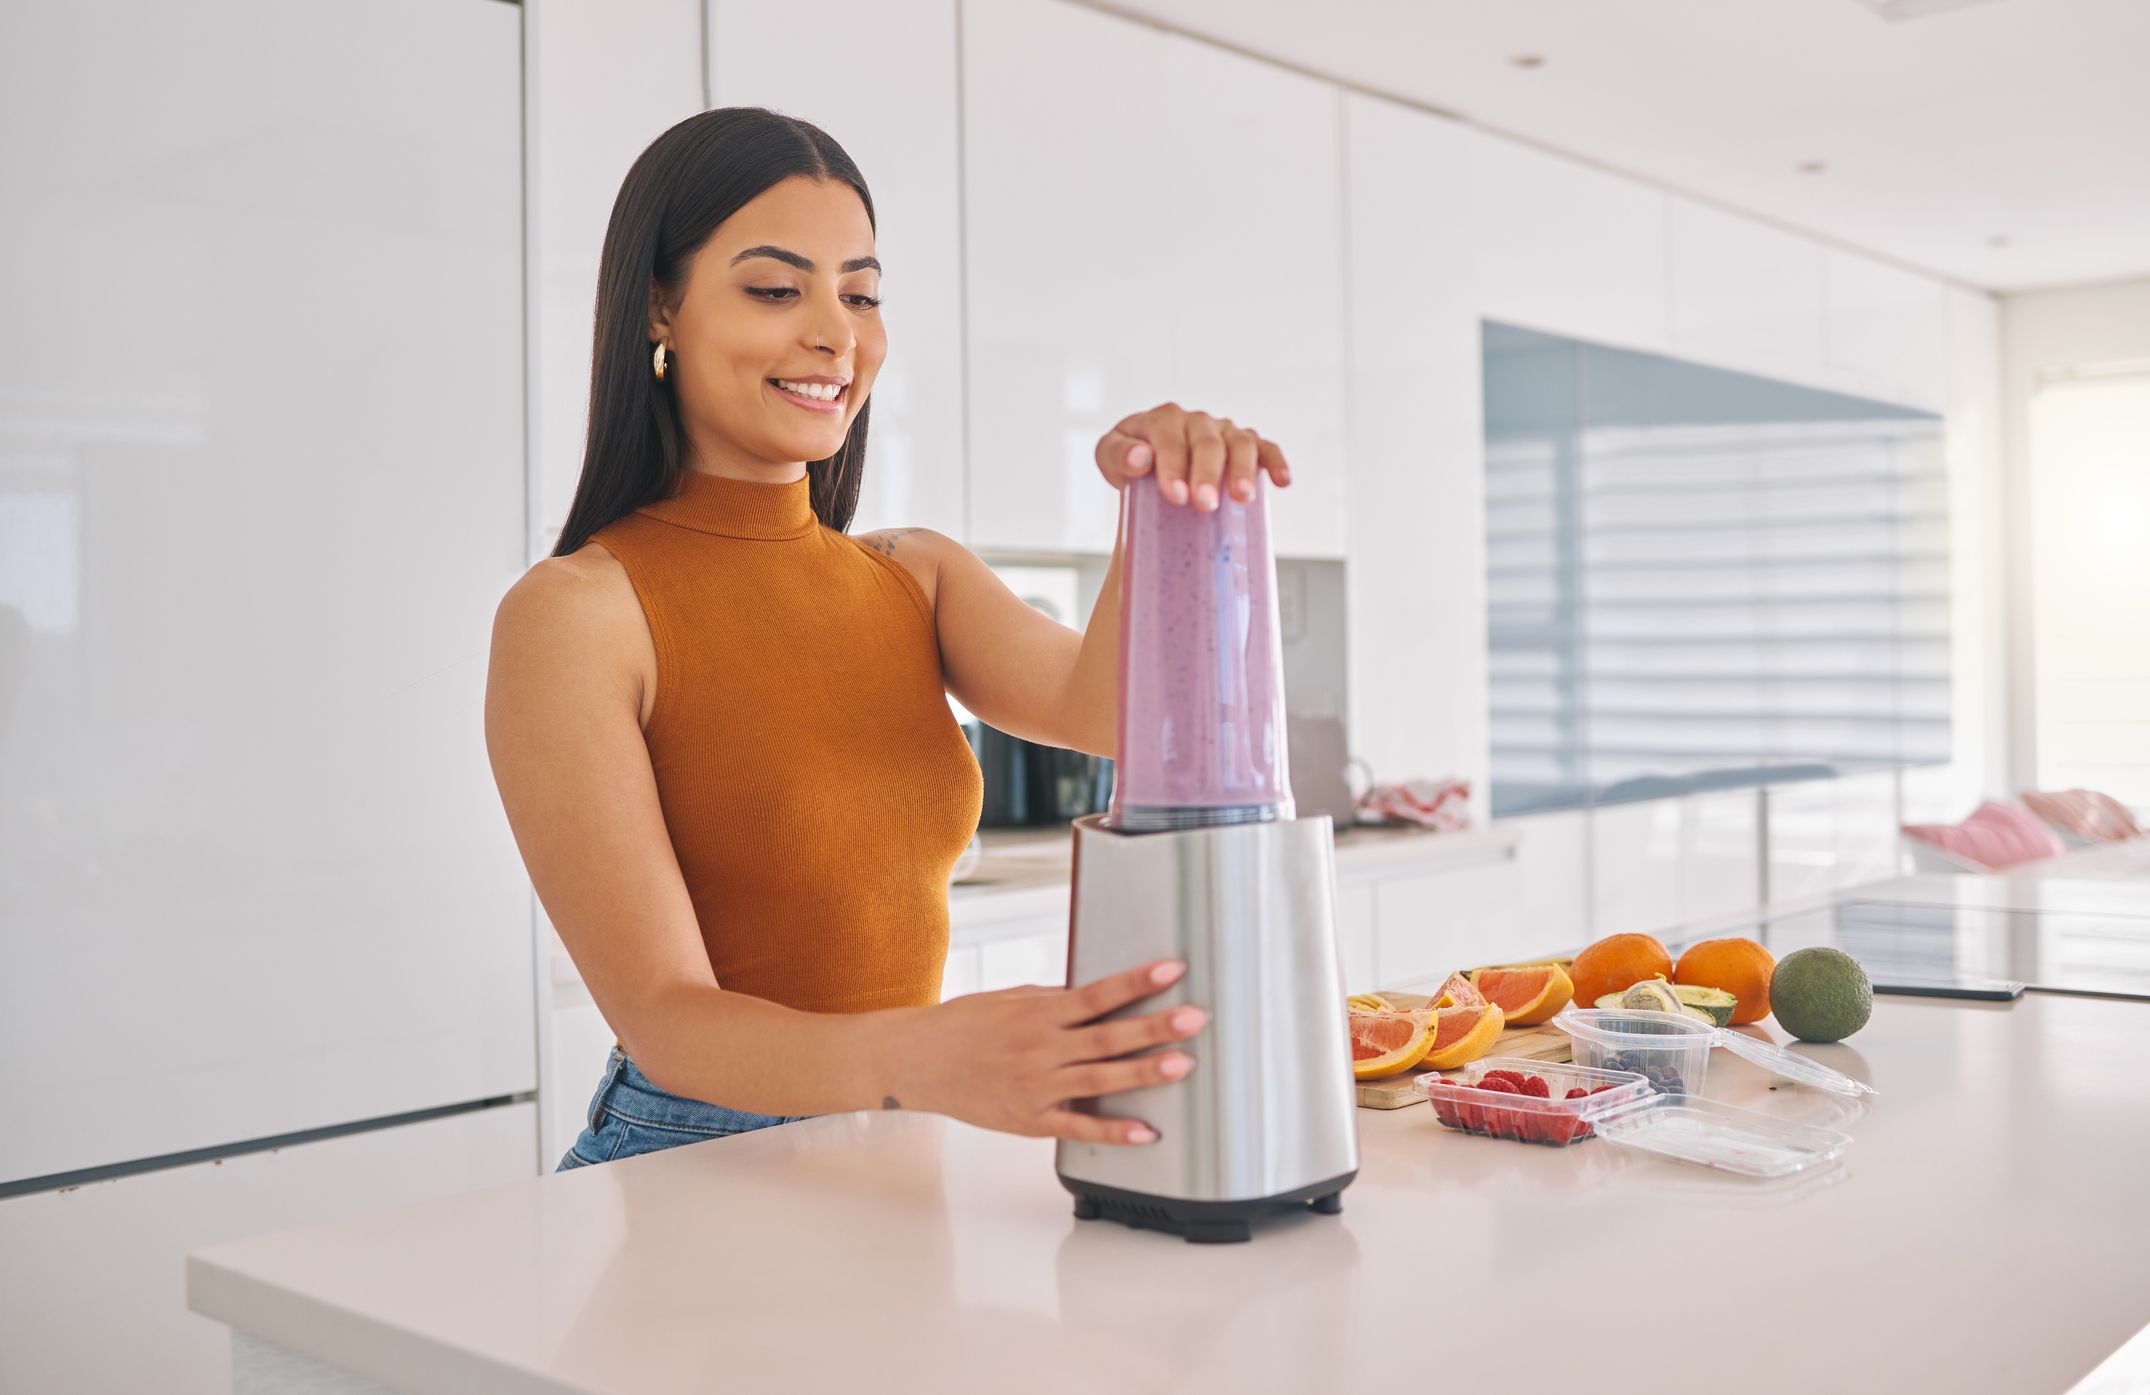 https://hips.hearstapps.com/hmg-prod/images/shot-of-a-woman-preparing-a-smoothie-in-the-kitchen-royalty-free-image-1702419973.jpg